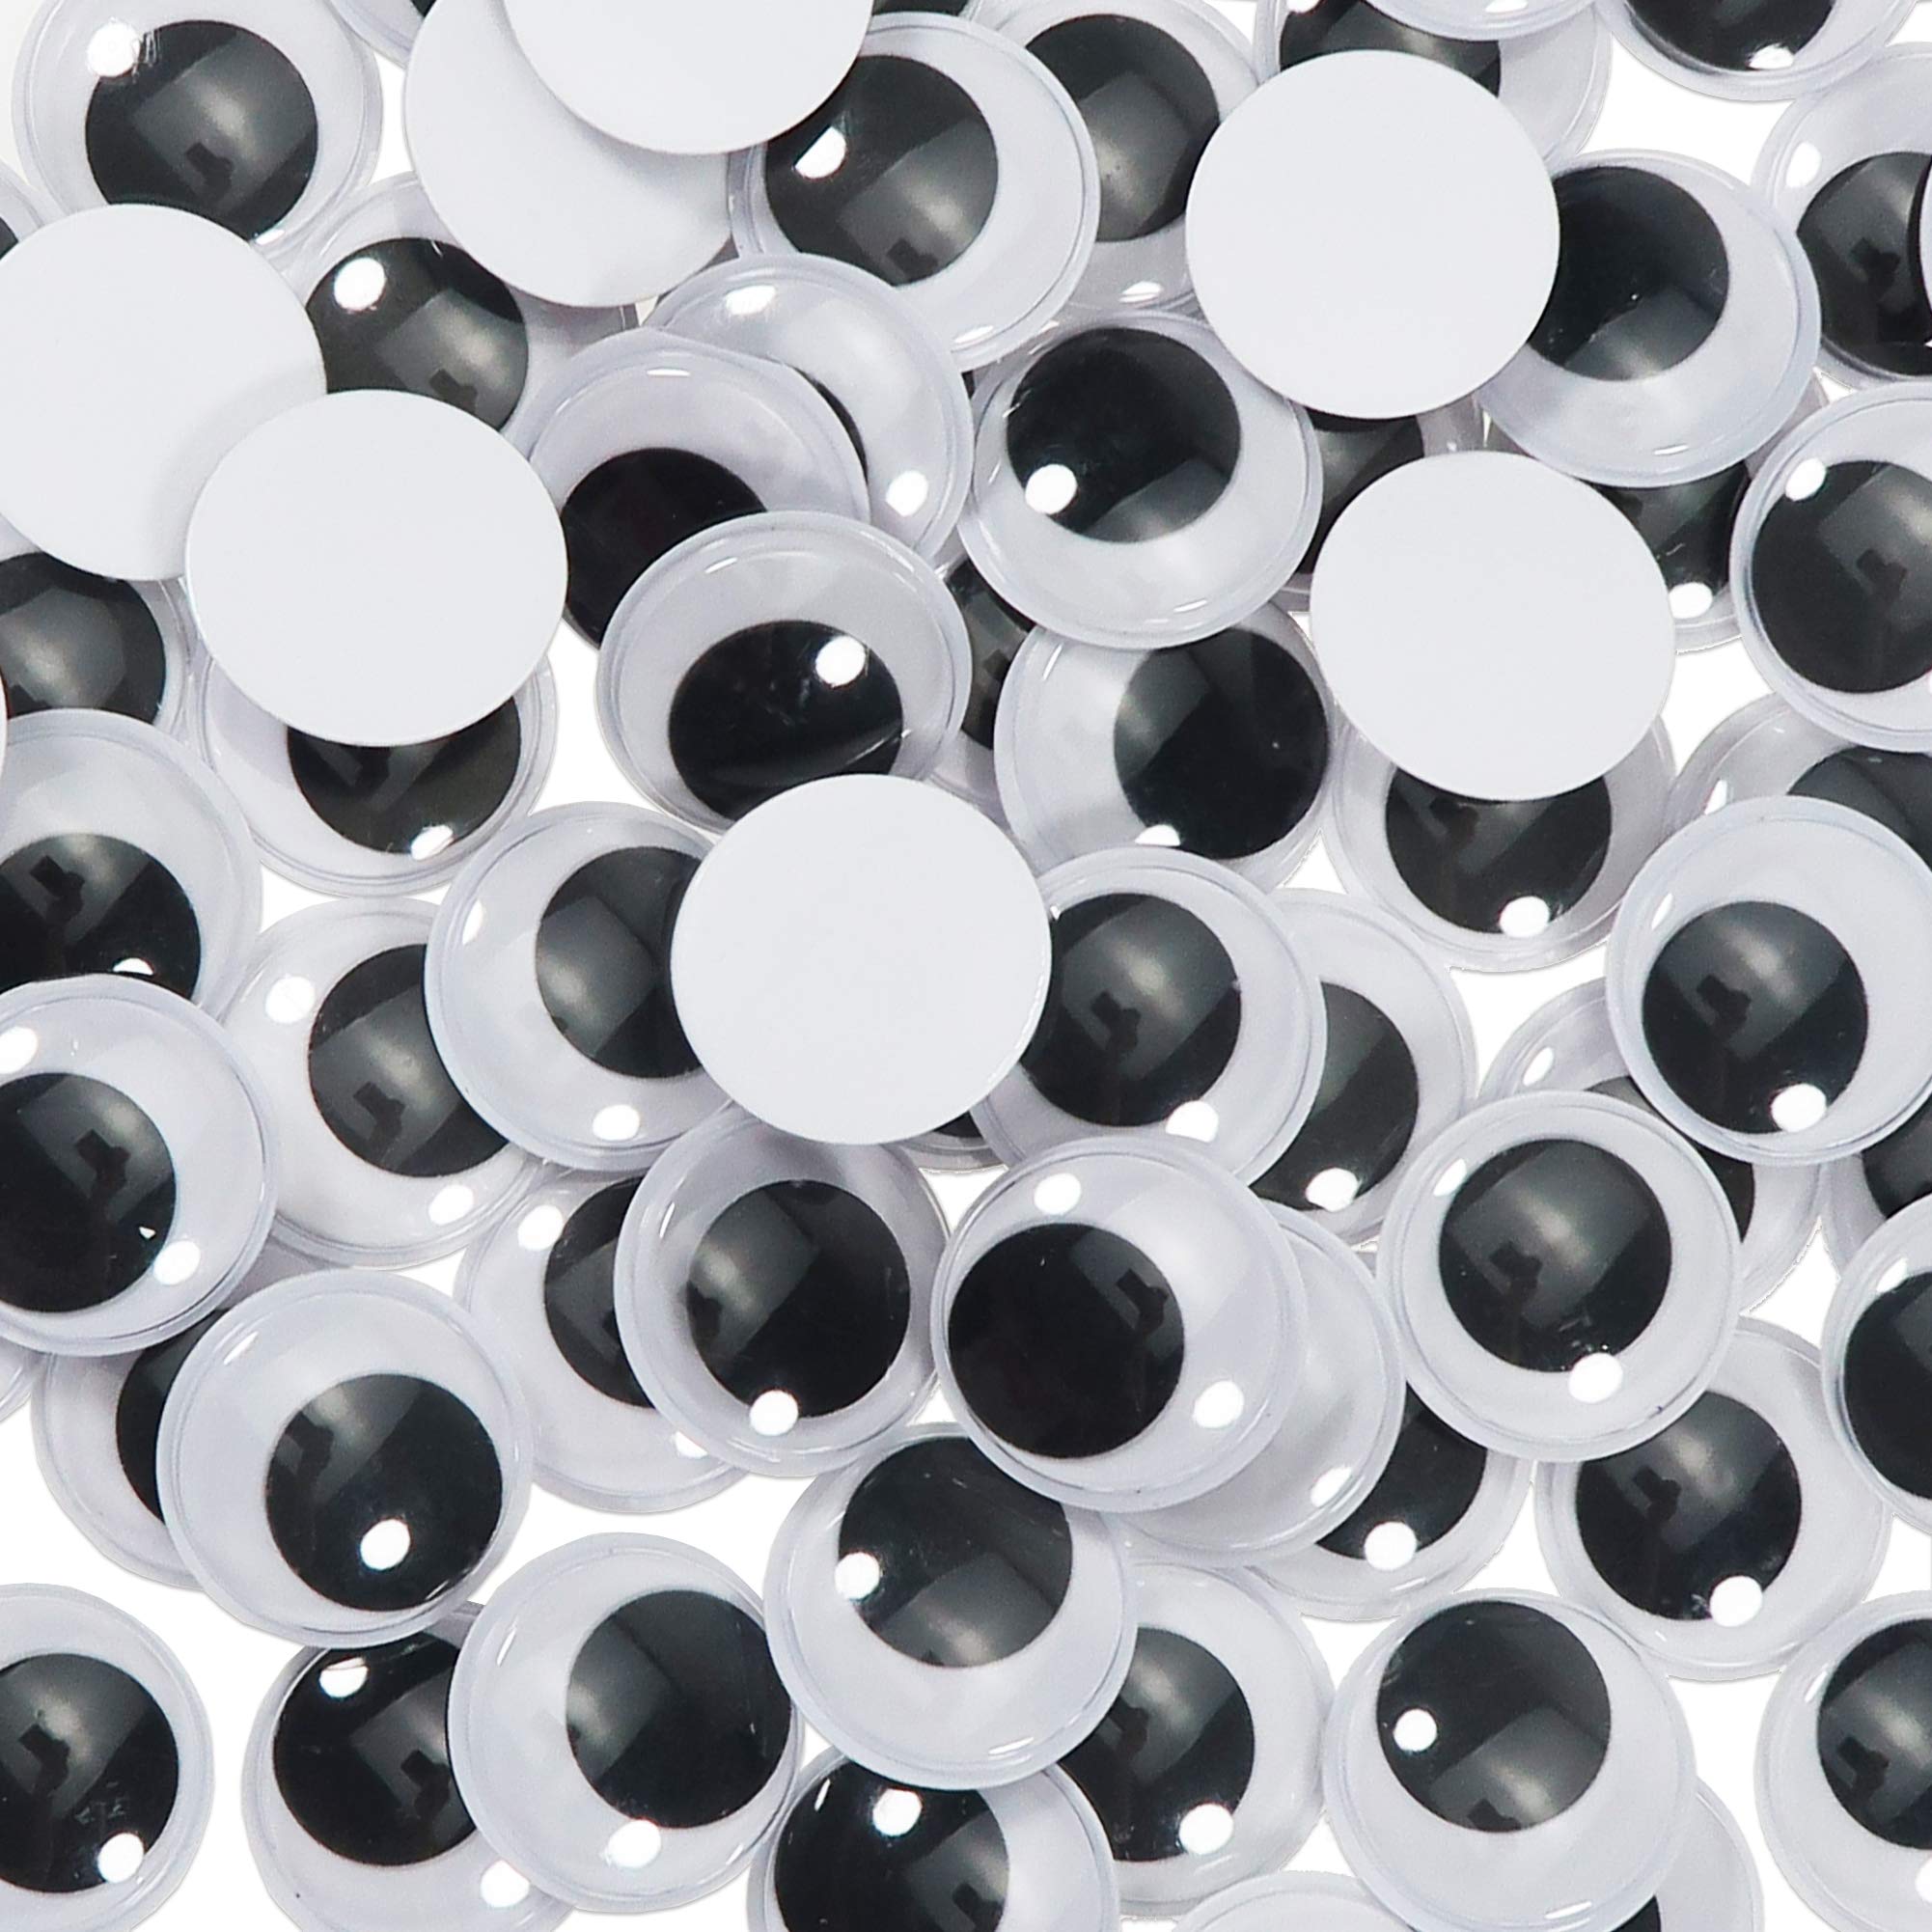 TOAOB 100pcs 30mm Black Wiggle Googly Eyes with Self Adhesive Round Plastic Sticker  Eyes for DIY Arts Crafts Scrapbooking Decoration